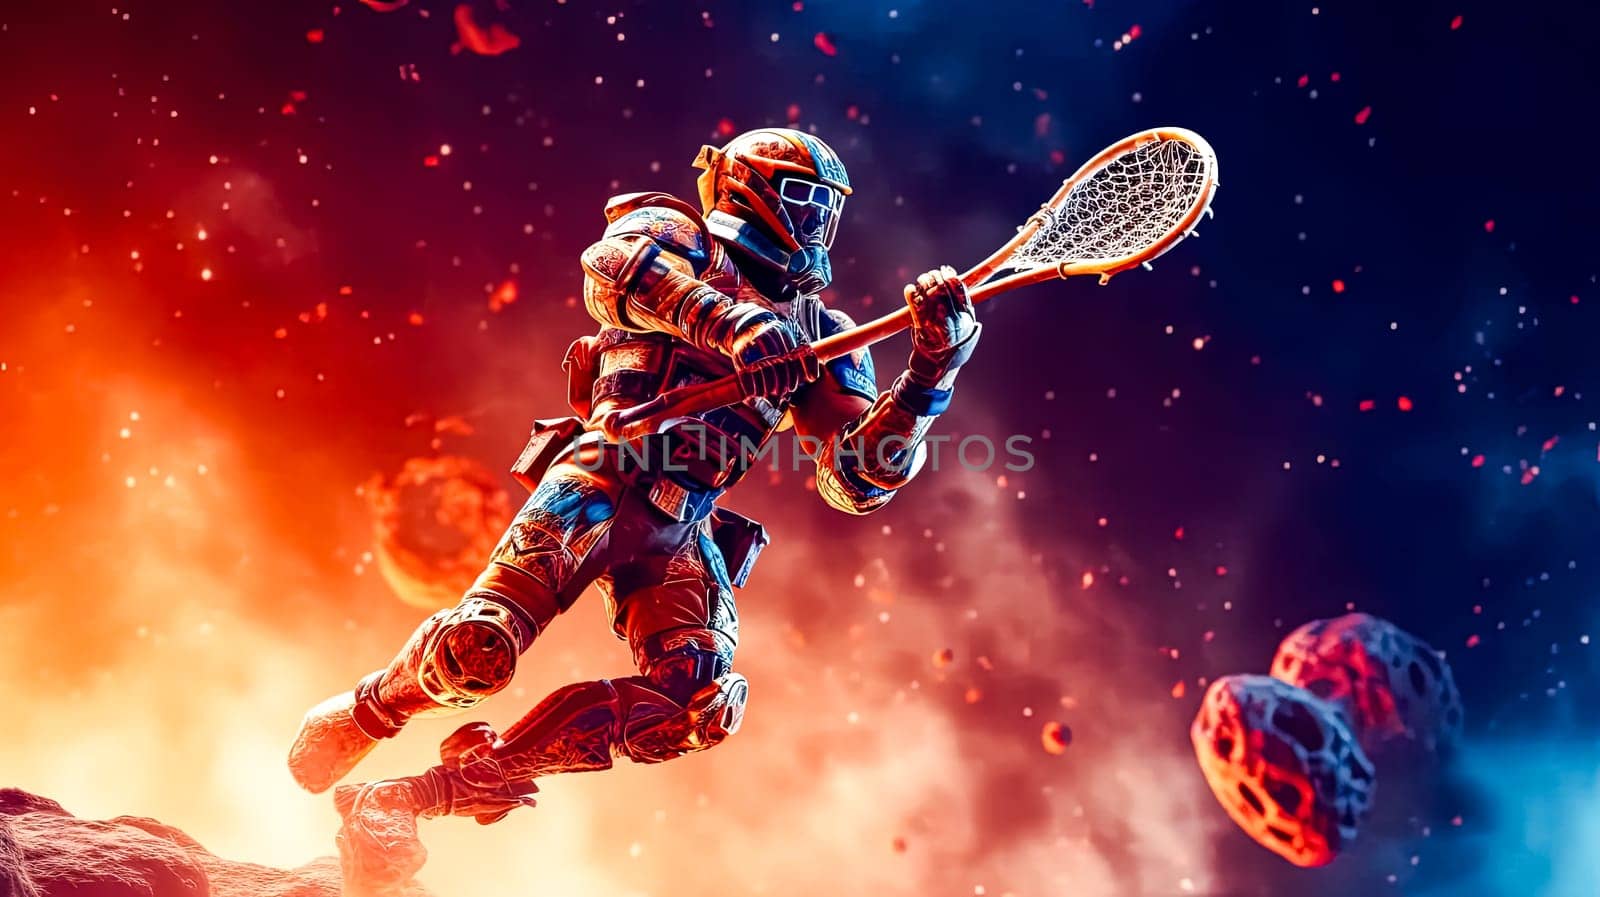 Dynamic lacrosse player in action, perfect for sports betting advertisement. Standard image capturing the intensity and motivation of sports.